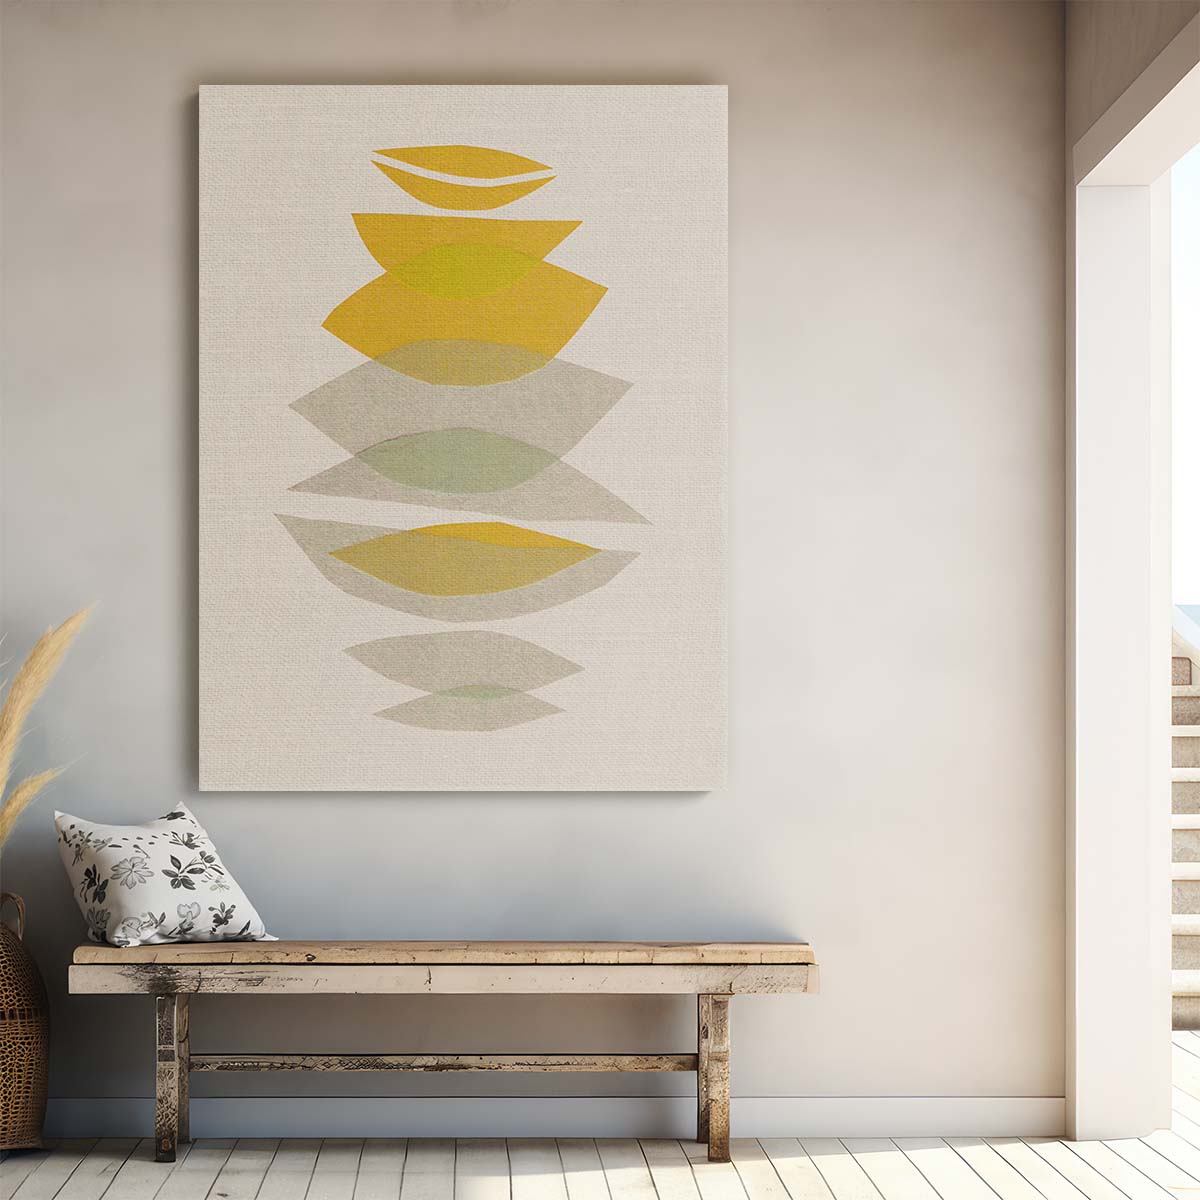 Playful Yellow Abstract Petals Boho Illustration in Collage Style by Luxuriance Designs, made in USA